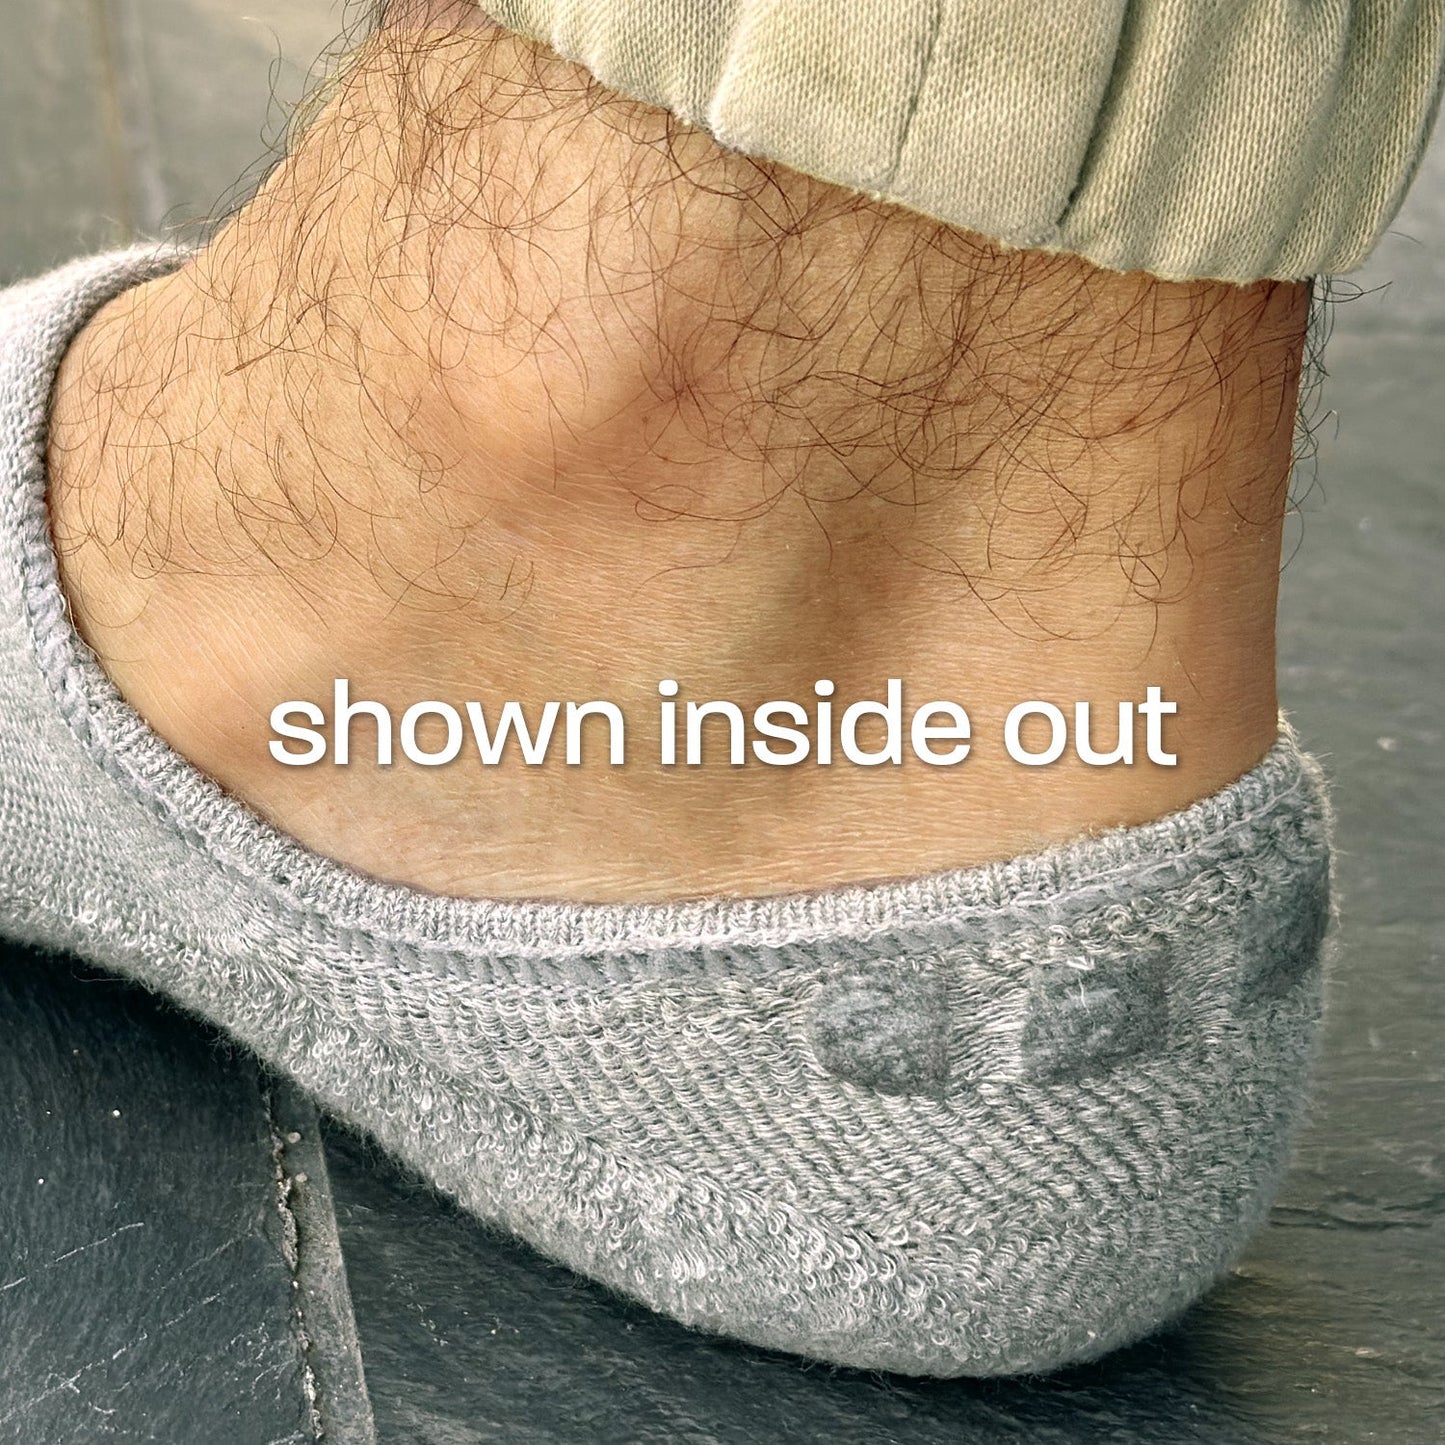 Photo showing close-up of Skinnys Performance sock heel-cup inside out on a man's foot, revealing padding and wrap-around gel grip